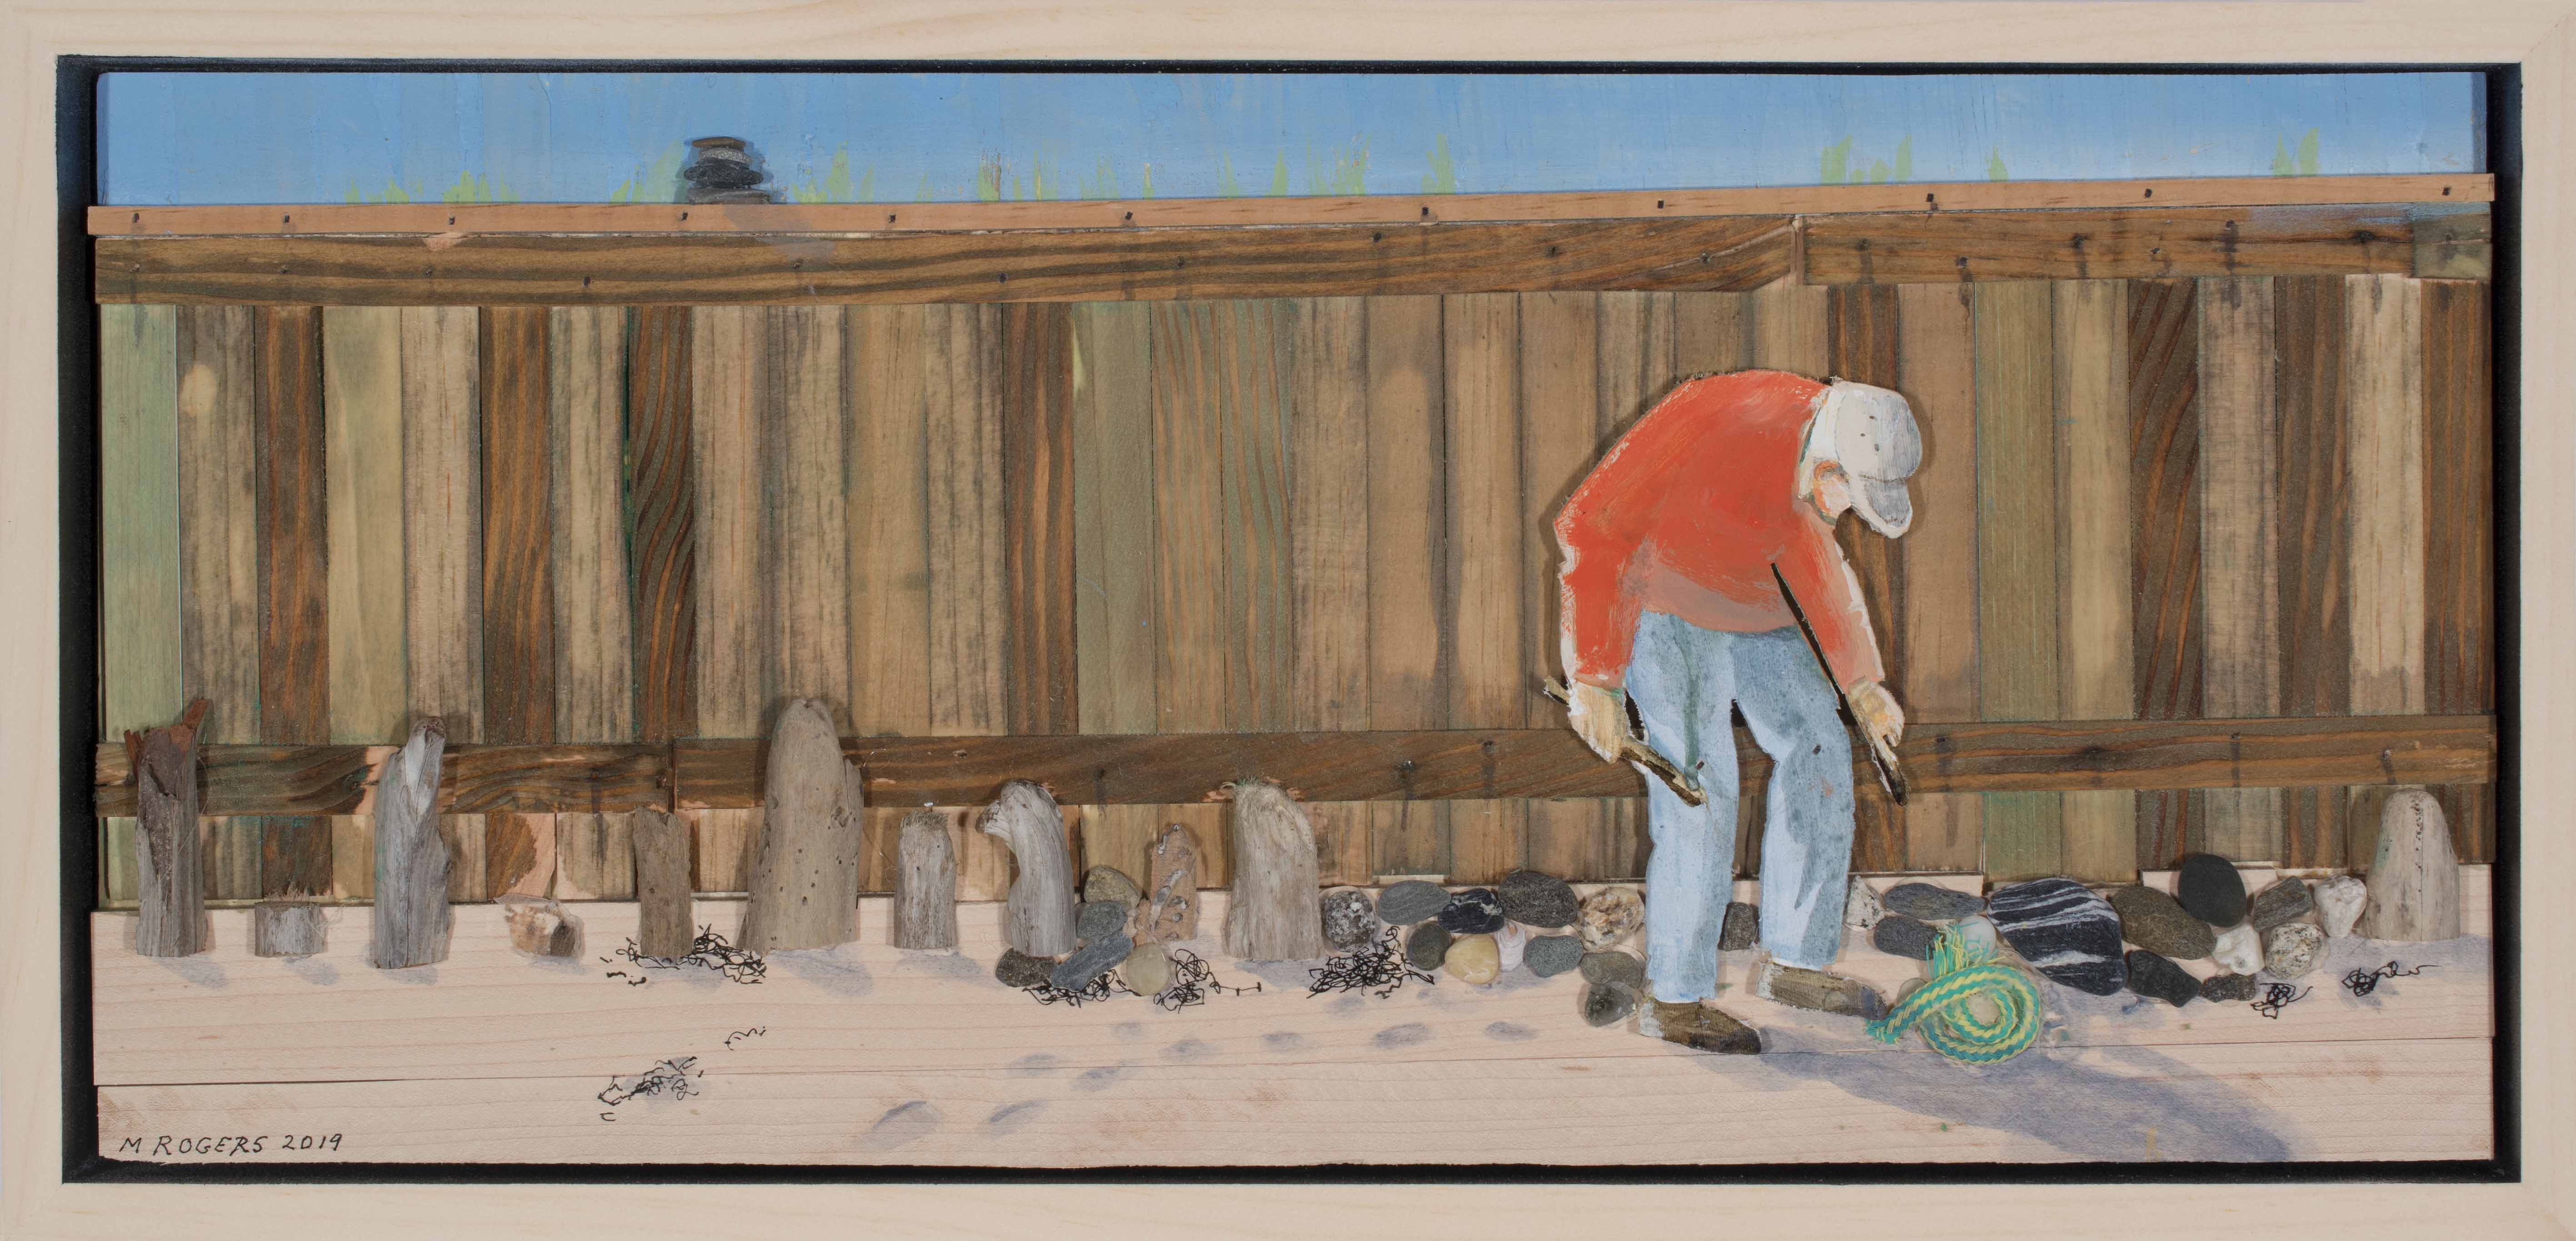 Hunting for Treasure, 2019, acrylic on wood and stone, 10 x 21 inches